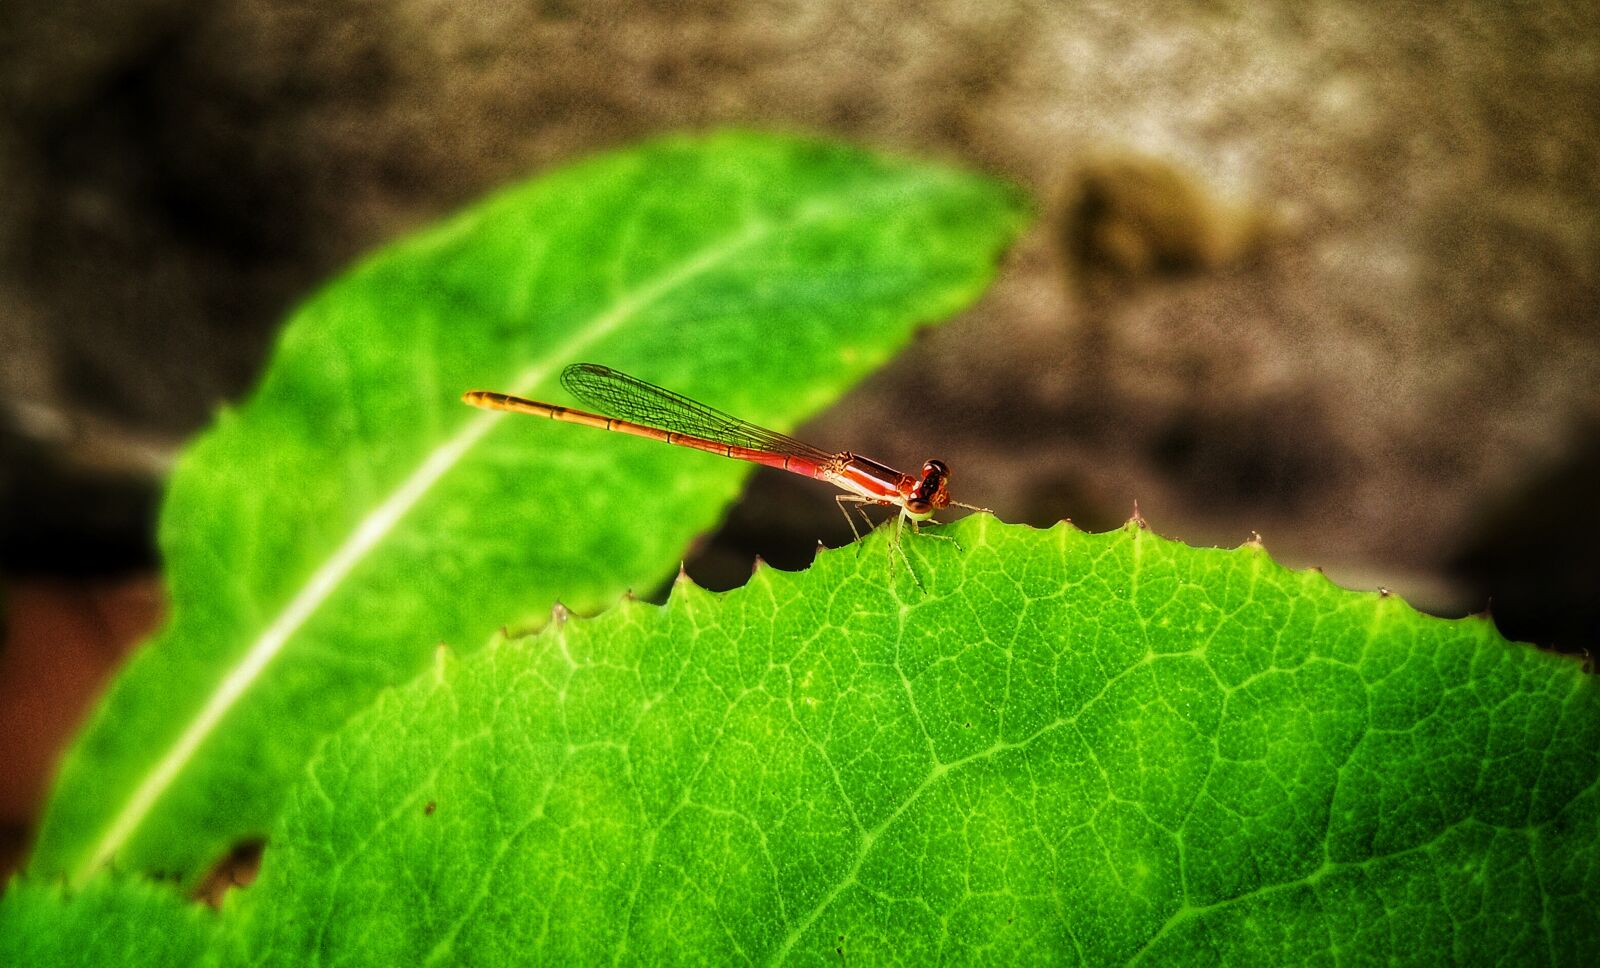 vivo 1609 sample photo. Dragonfly, insect, summer photography